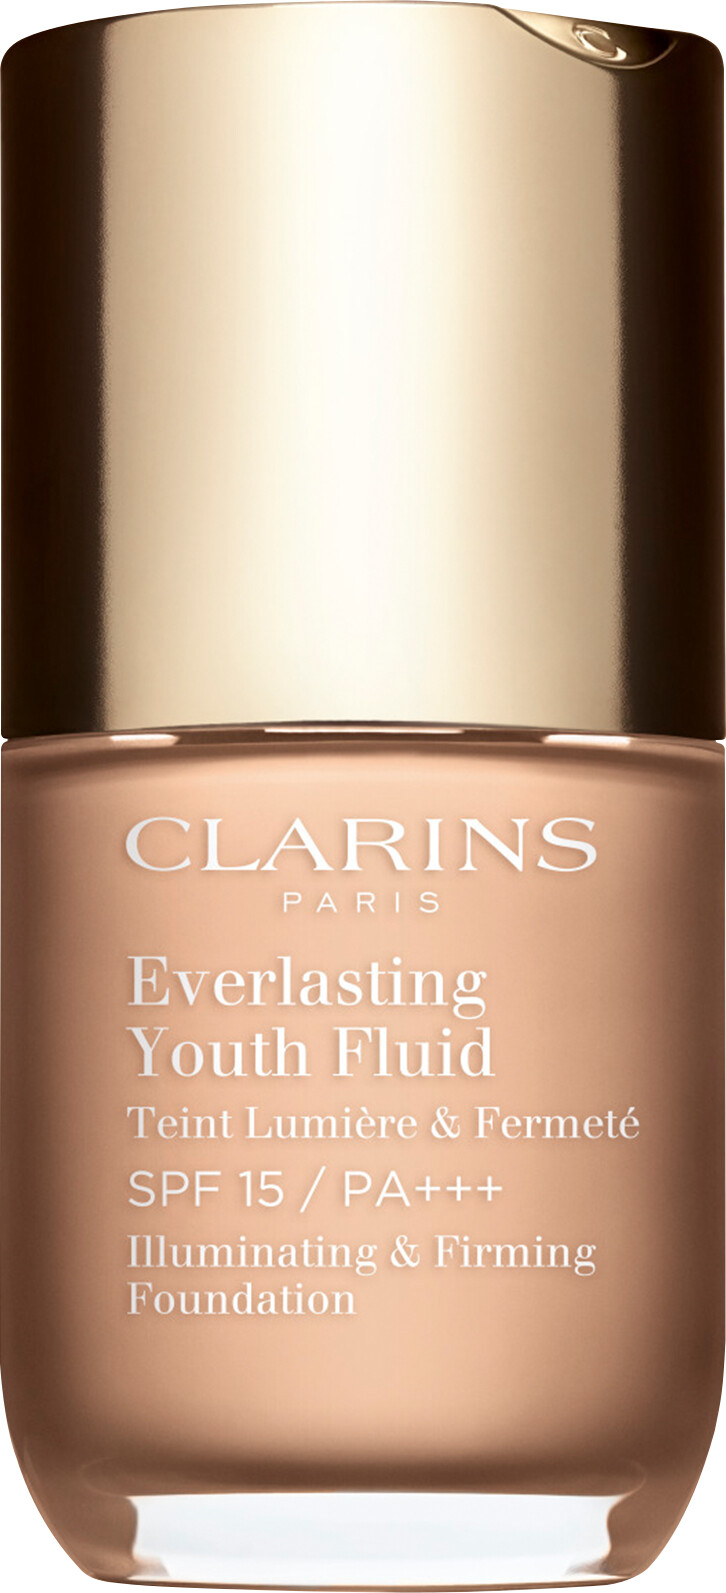 Clarins Everlasting Youth Fluid Illuminating and Firming Foundation SPF15 30ml 102.5 - Porcelain